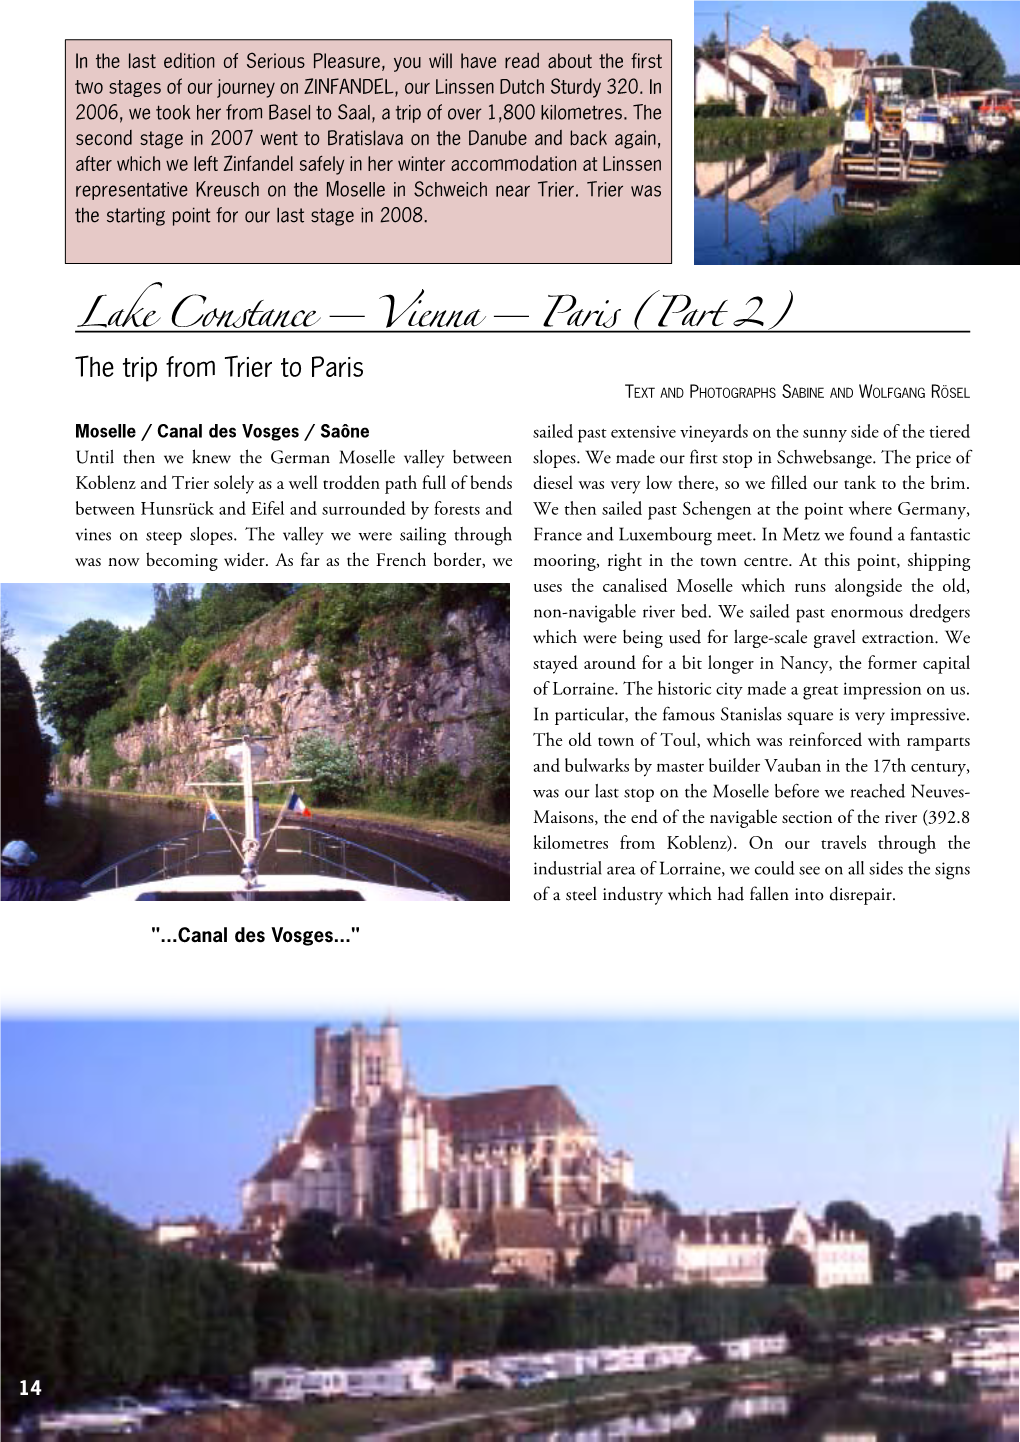 Lake Constance – Vienna – Paris (Part 2) the Trip from Trier to Paris Te X T a N D Ph O T O G R a P H S Sa B I N E a N D Wo Lf G a N G Rö S E L